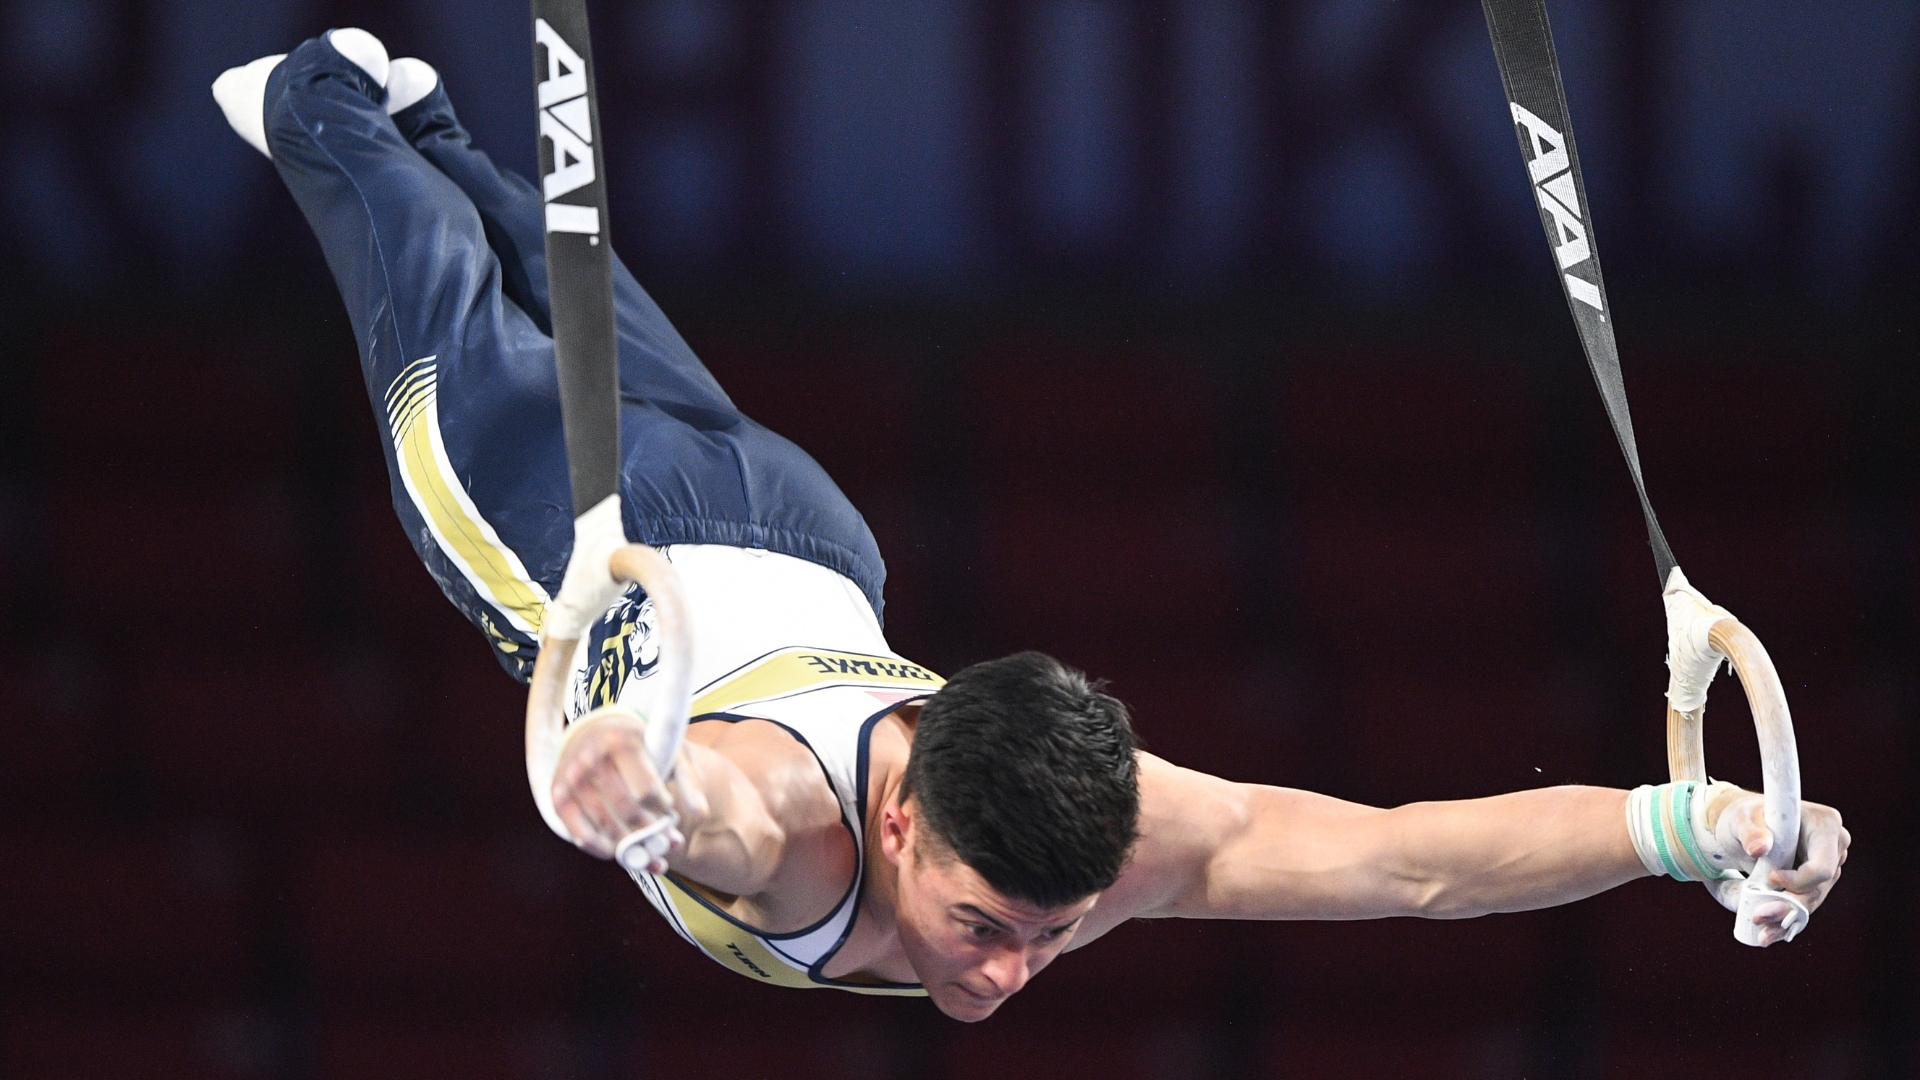 Navy's Isaiah Drake swings on the still rings during the 2022 NCAA Men's Gymnastics Championships.